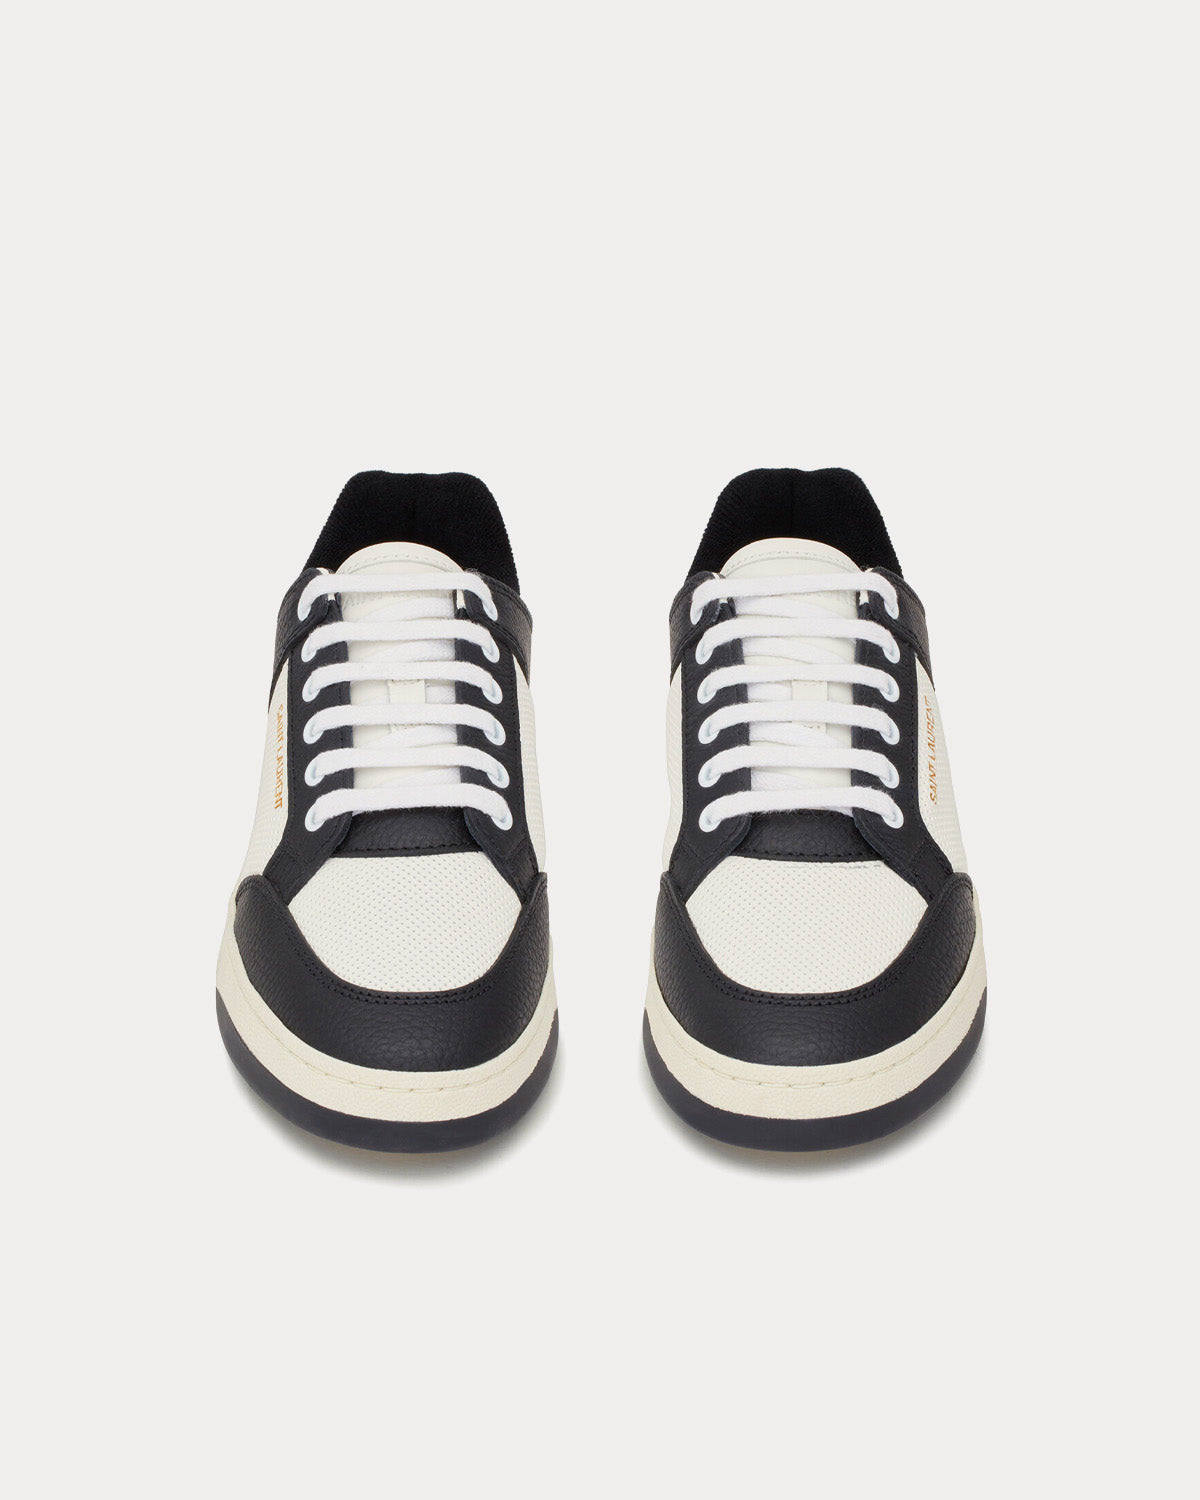 Saint Laurent - SL/61 Smooth & Grained Leather White / Black Low Top Sneakers